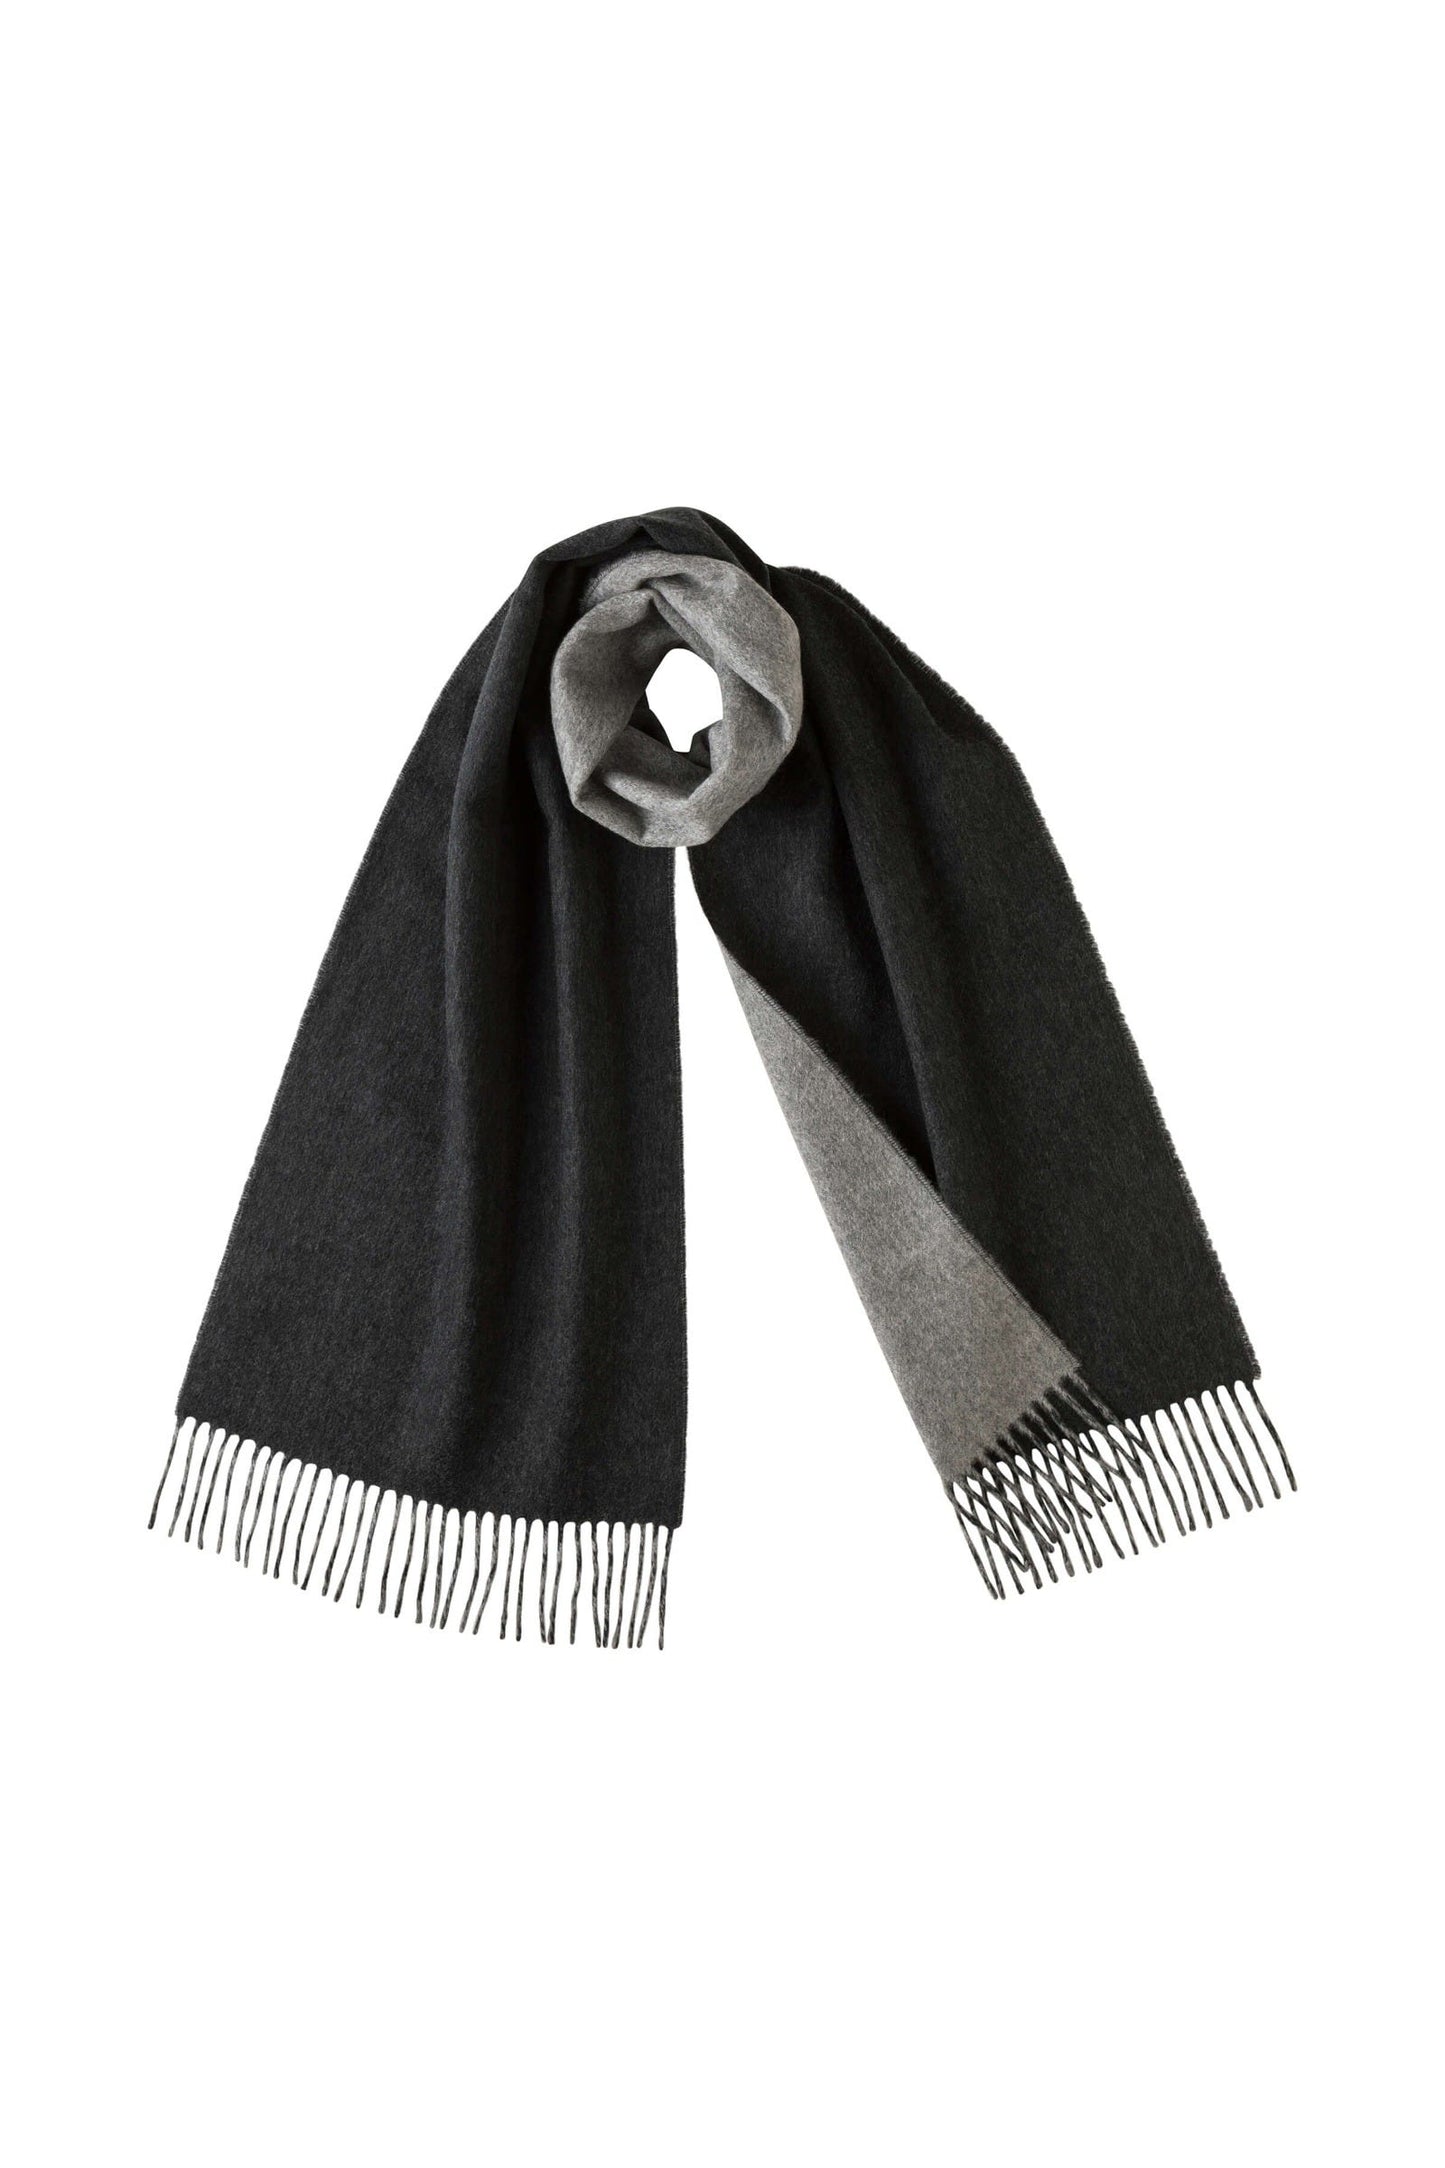 Reversible Charcoal & Light Grey Cashmere Scarf